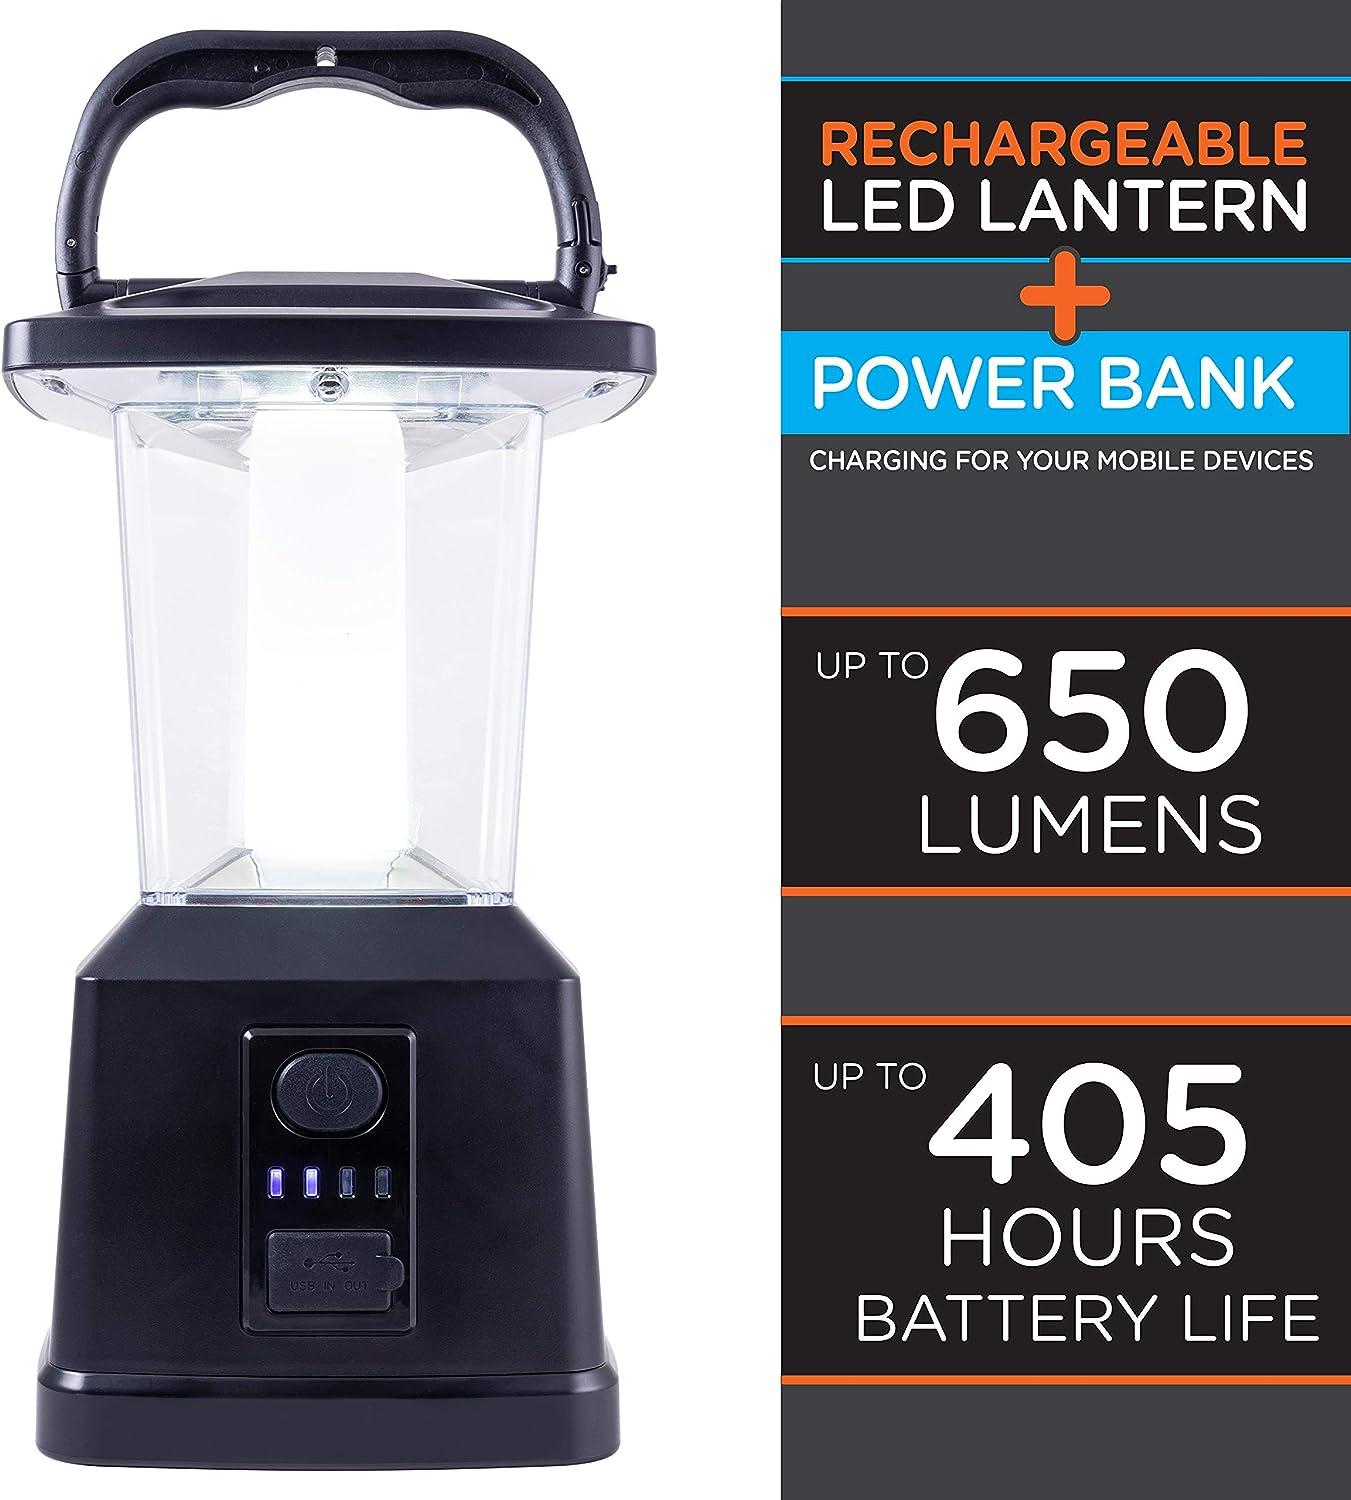 Enbrighten LED Camping Lantern, Battery Powered, Carabiner Handle, Hiking  Gear, Emergency Light, Tent Light, Lantern Flashlight for Hurricane,  Emergency, Survival Kits, Fishing, Home and More Rechargeable - Black